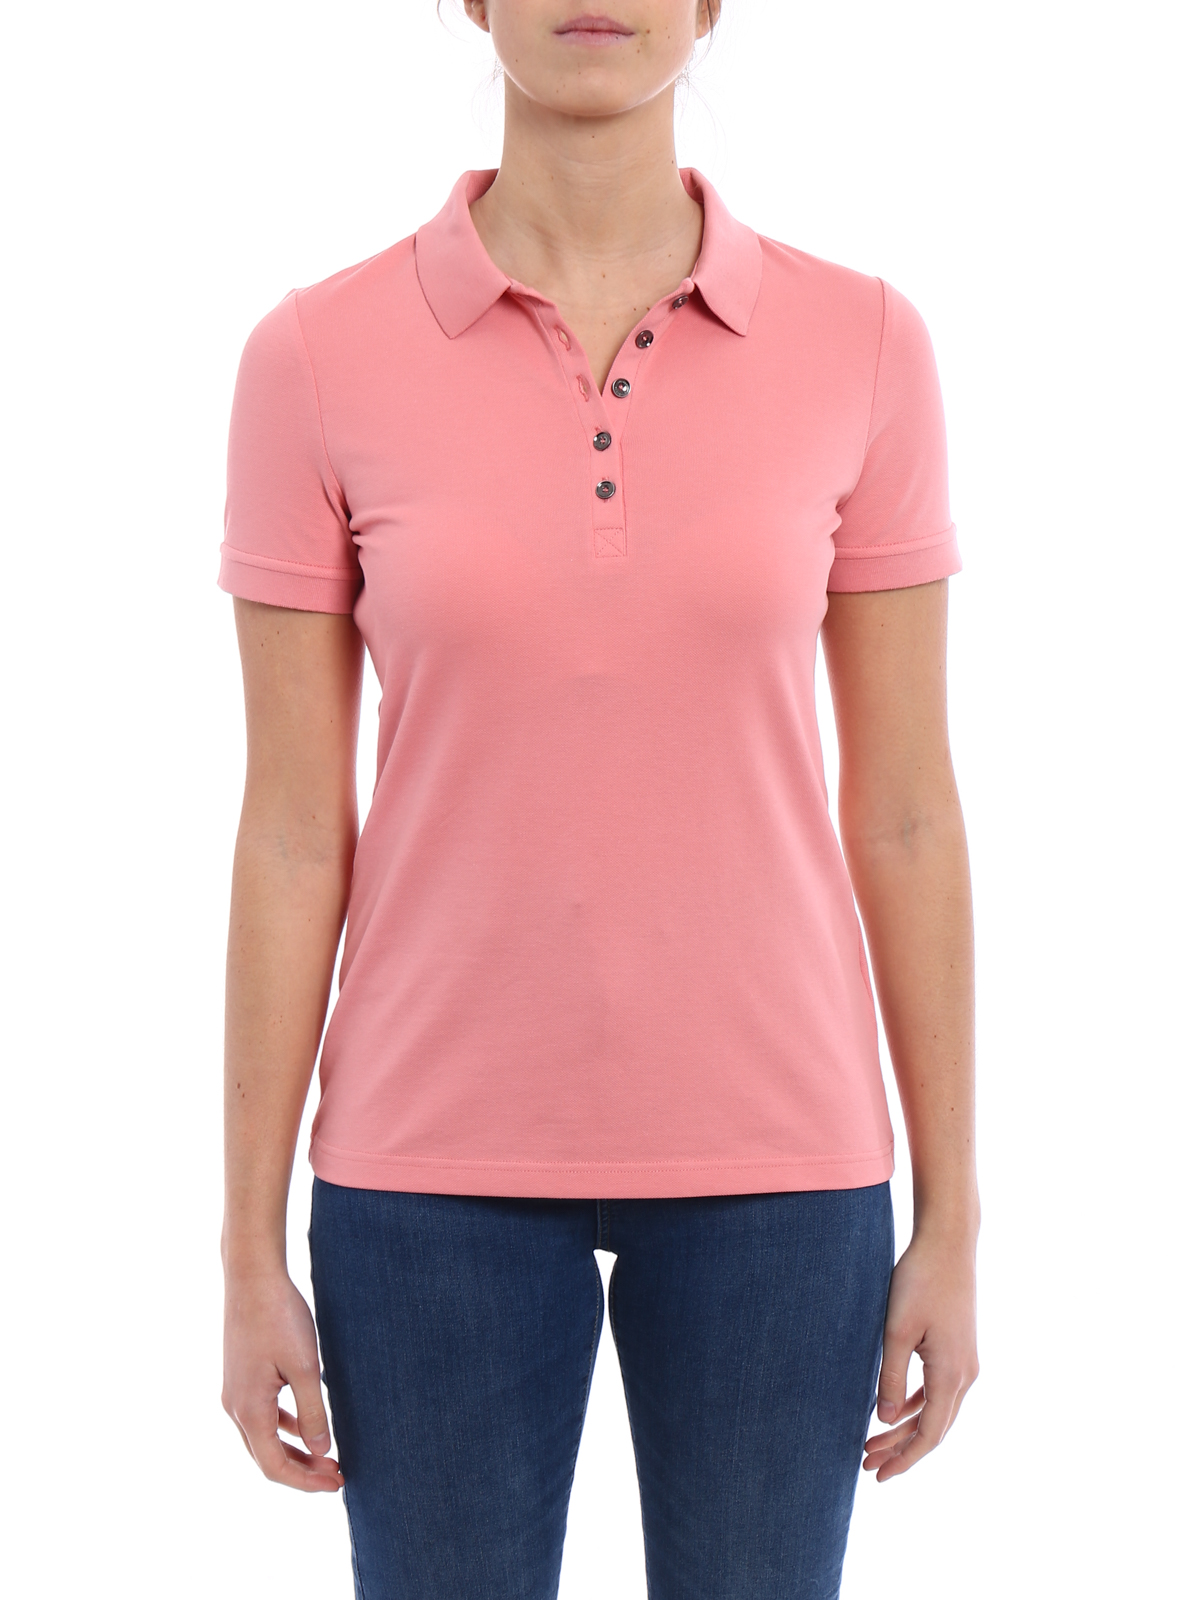 burberry polo womens pink